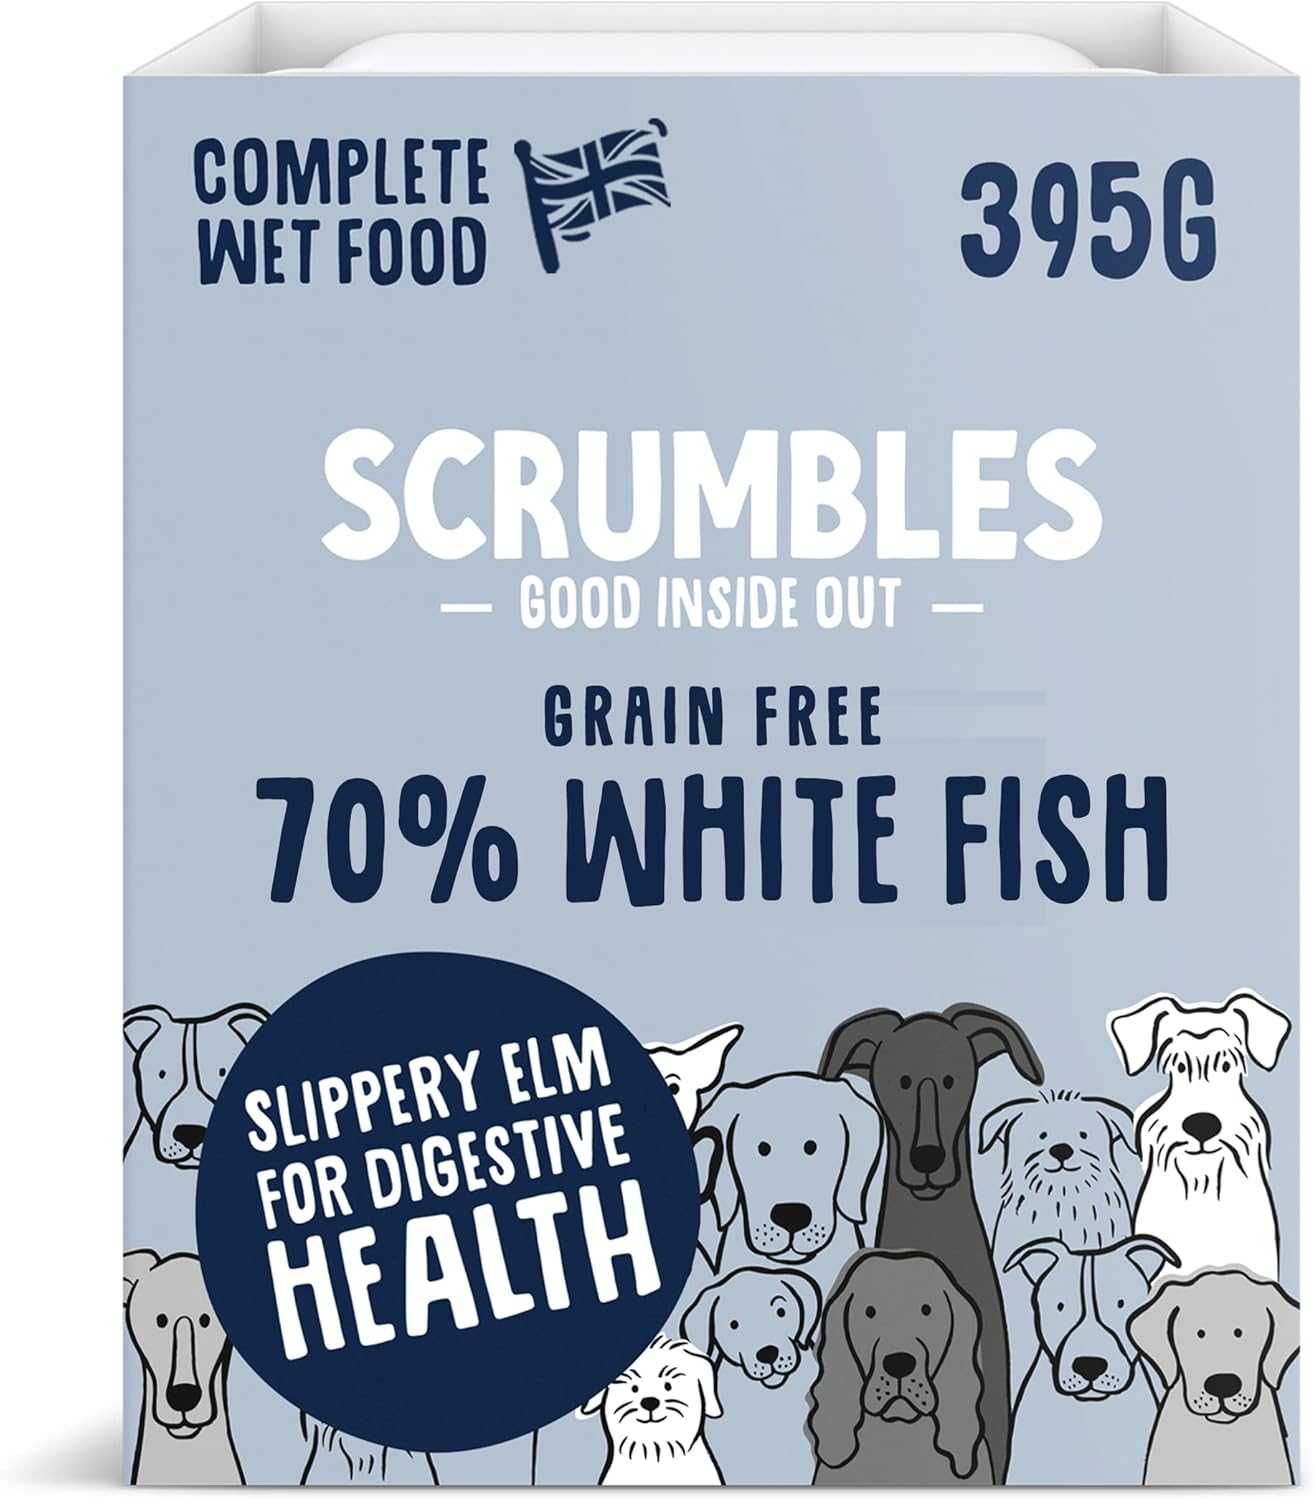 Scrumbles Natural Wet Dog Food, Grain Free Recipe with 70% White Fish and Slippery Elm, 7x 395g?WDS7